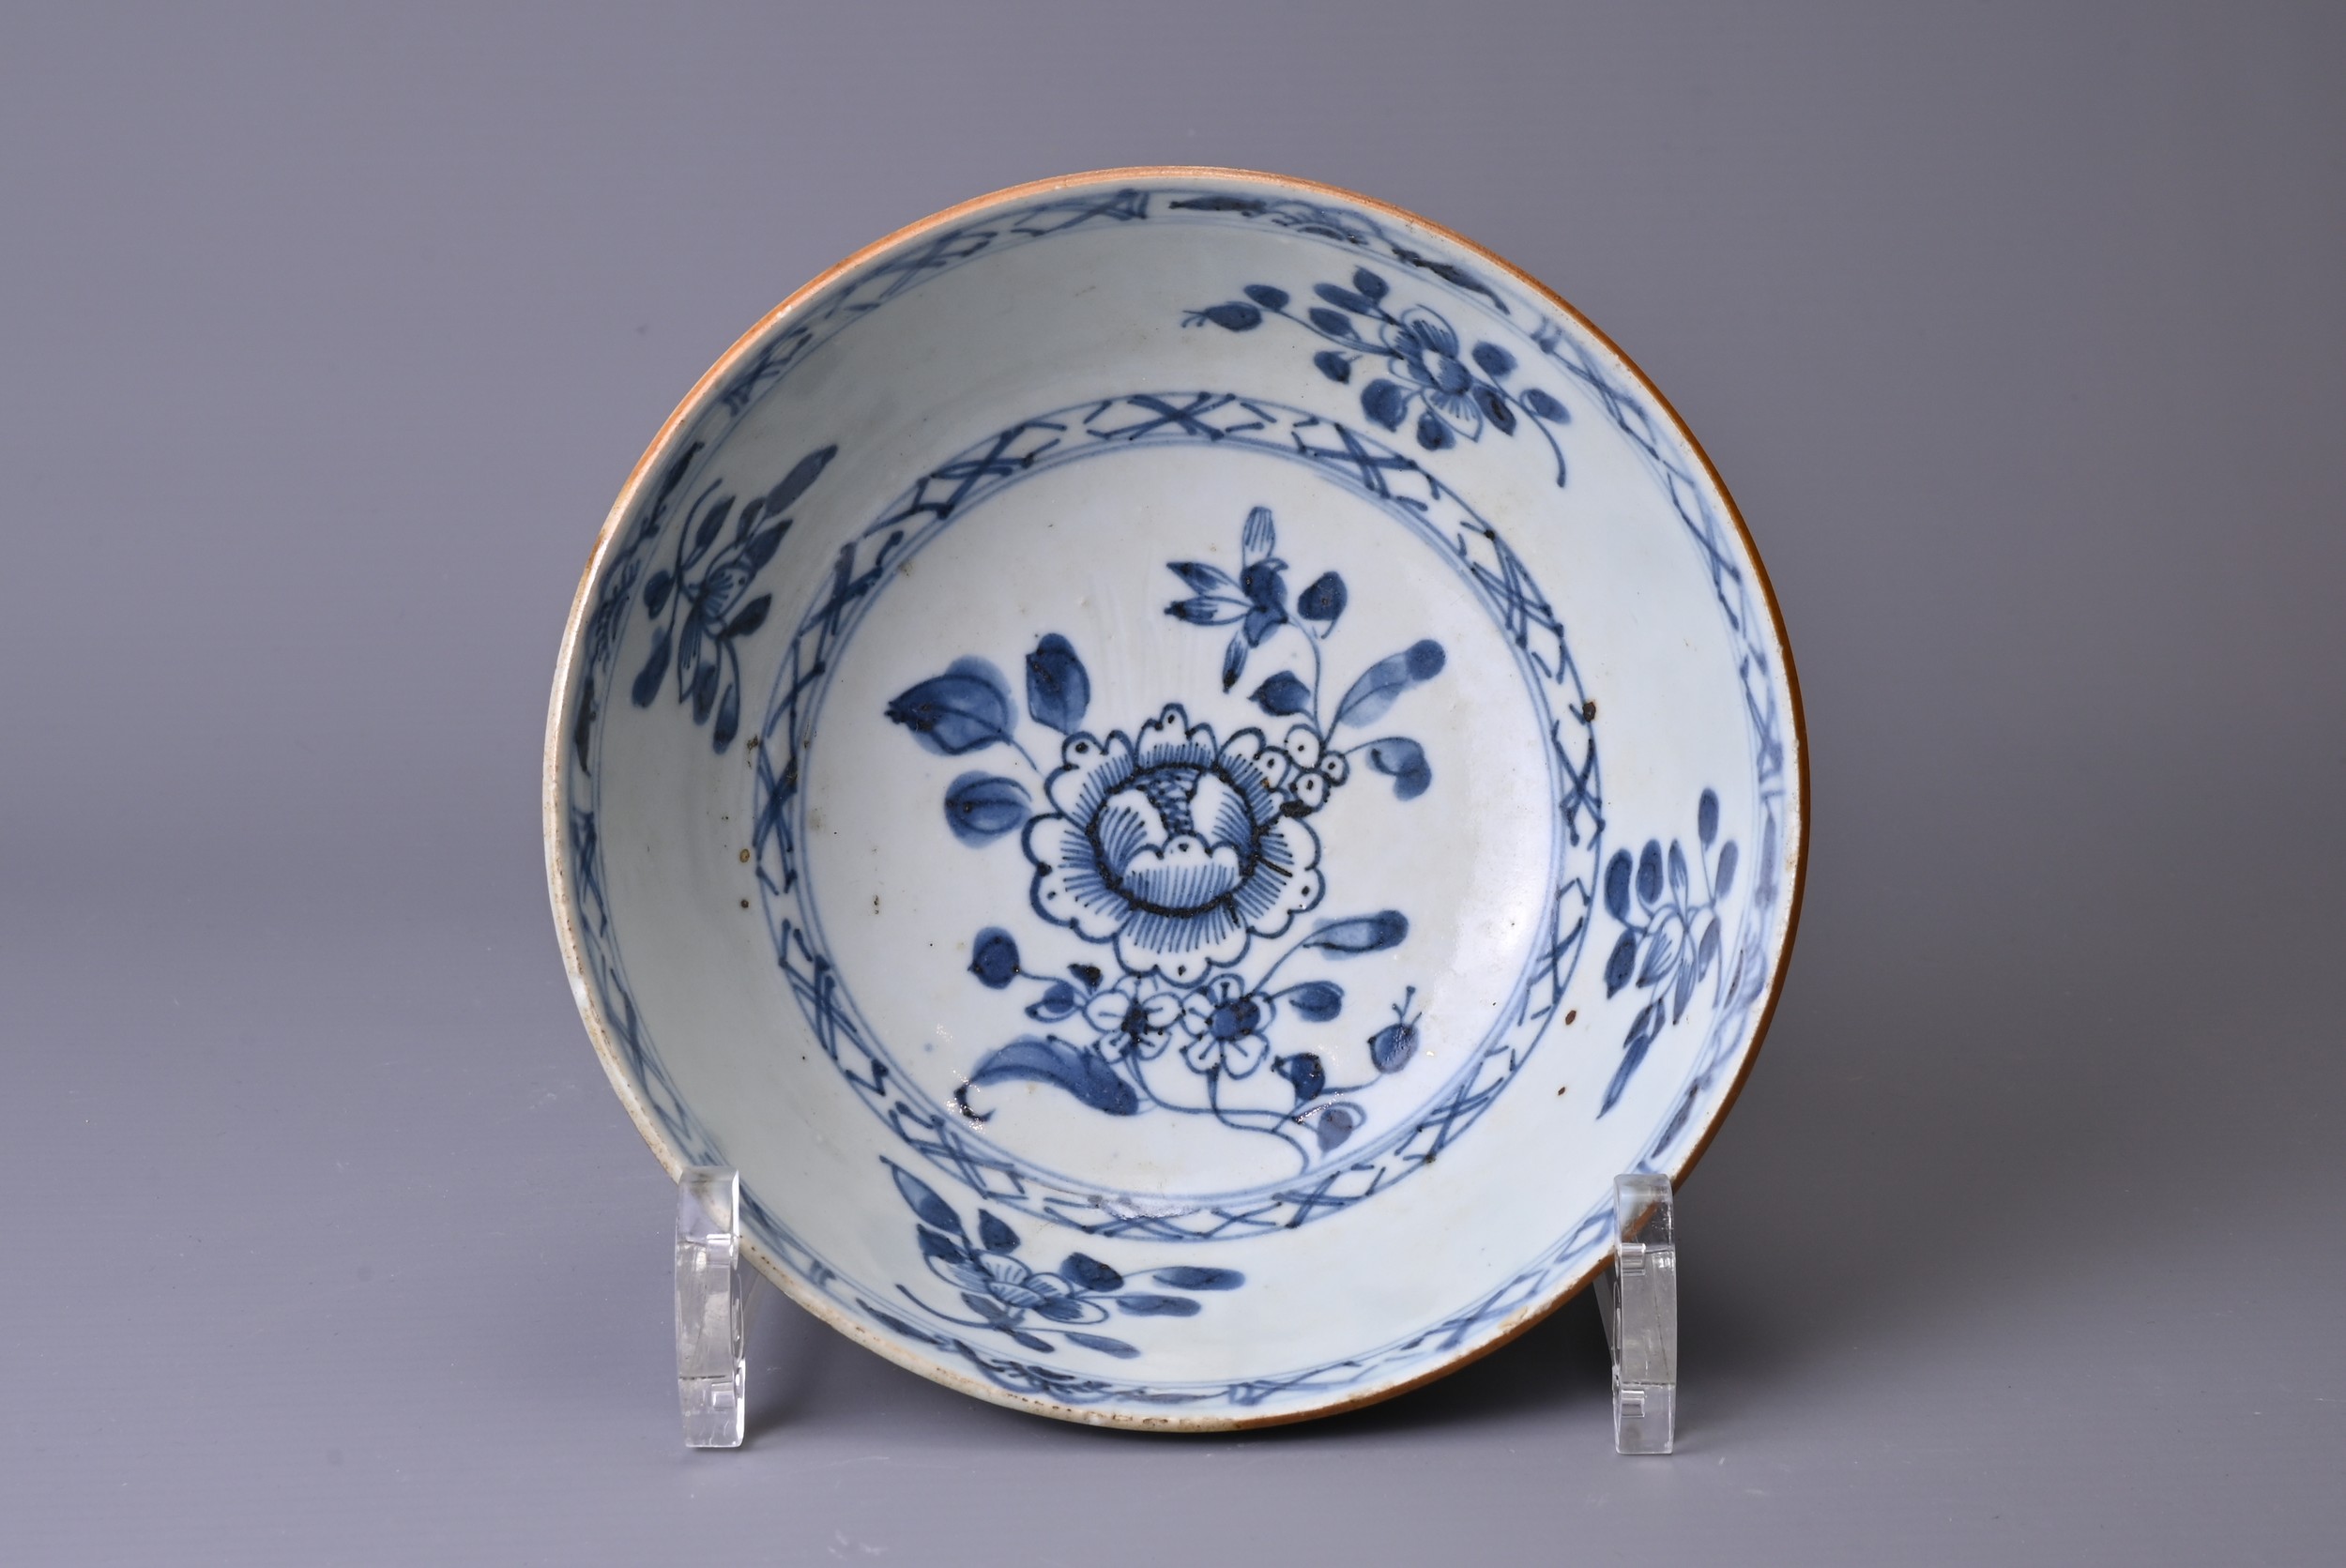 A CHINESE BATAVIA PORCELAIN BOWL, 18TH CENTURY. The interior decorated in blue and white with floral - Image 2 of 5